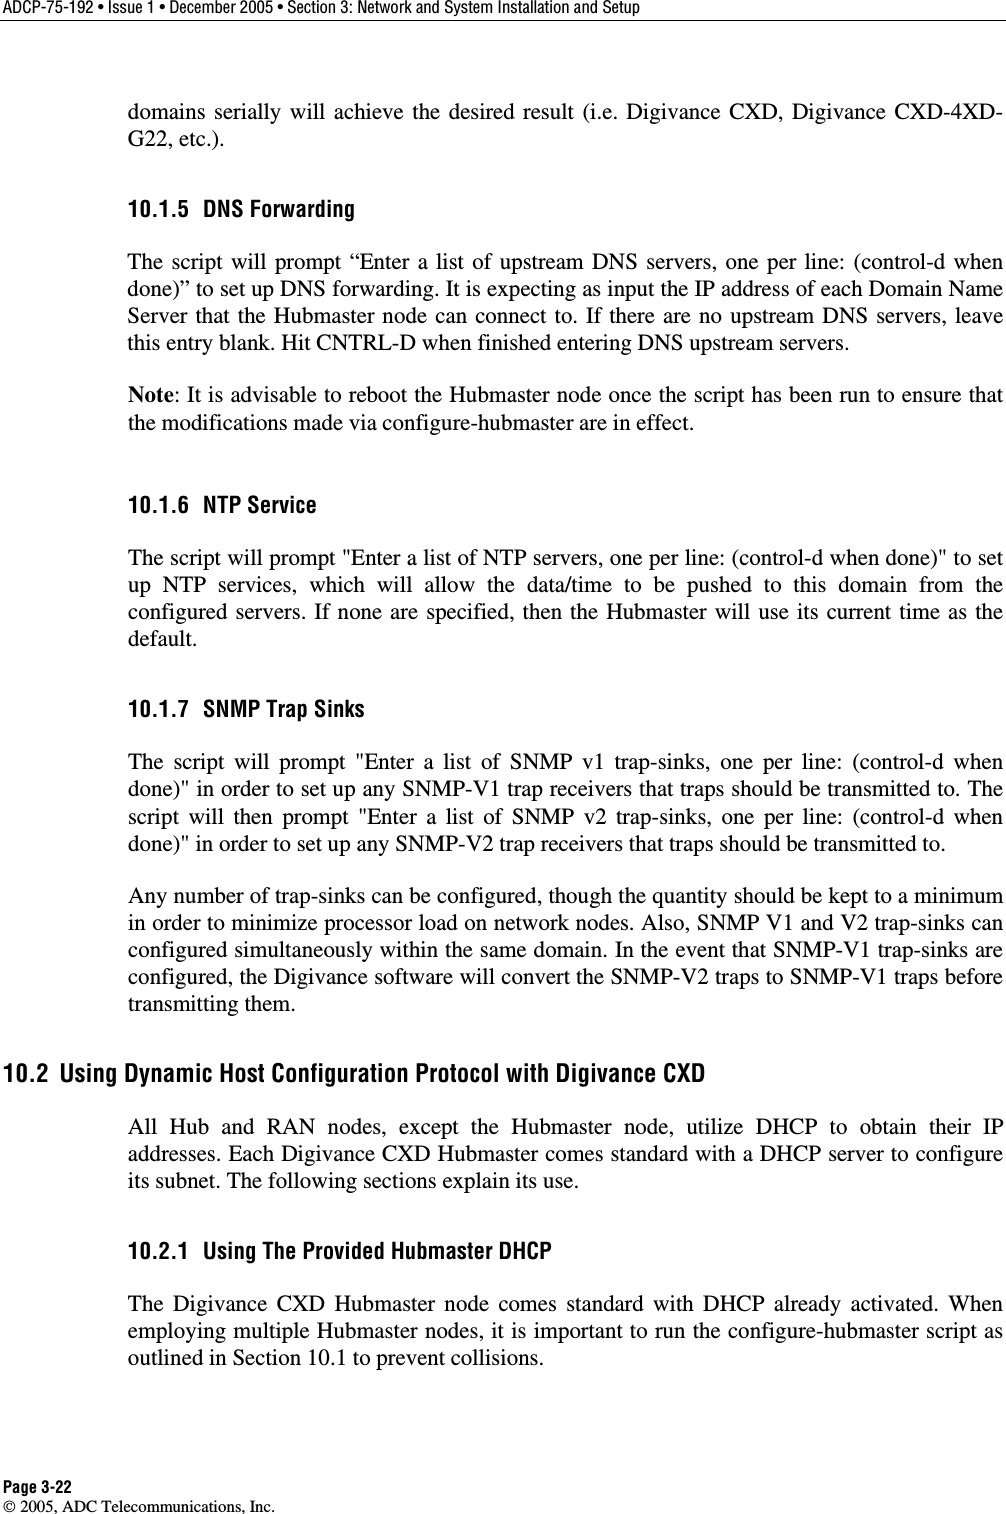 ADCP-75-192 • Issue 1 • December 2005 • Section 3: Network and System Installation and Setup Page 3-22  2005, ADC Telecommunications, Inc. domains serially will achieve the desired result (i.e. Digivance CXD, Digivance CXD-4XD-G22, etc.). 10.1.5 DNS Forwarding The script will prompt “Enter a list of upstream DNS servers, one per line: (control-d when done)” to set up DNS forwarding. It is expecting as input the IP address of each Domain Name Server that the Hubmaster node can connect to. If there are no upstream DNS servers, leave this entry blank. Hit CNTRL-D when finished entering DNS upstream servers.   Note: It is advisable to reboot the Hubmaster node once the script has been run to ensure that the modifications made via configure-hubmaster are in effect. 10.1.6 NTP Service The script will prompt &quot;Enter a list of NTP servers, one per line: (control-d when done)&quot; to set up NTP services, which will allow the data/time to be pushed to this domain from the configured servers. If none are specified, then the Hubmaster will use its current time as the default. 10.1.7  SNMP Trap Sinks The script will prompt &quot;Enter a list of SNMP v1 trap-sinks, one per line: (control-d when done)&quot; in order to set up any SNMP-V1 trap receivers that traps should be transmitted to. The script will then prompt &quot;Enter a list of SNMP v2 trap-sinks, one per line: (control-d when done)&quot; in order to set up any SNMP-V2 trap receivers that traps should be transmitted to.  Any number of trap-sinks can be configured, though the quantity should be kept to a minimum in order to minimize processor load on network nodes. Also, SNMP V1 and V2 trap-sinks can configured simultaneously within the same domain. In the event that SNMP-V1 trap-sinks are configured, the Digivance software will convert the SNMP-V2 traps to SNMP-V1 traps before transmitting them. 10.2  Using Dynamic Host Configuration Protocol with Digivance CXD All Hub and RAN nodes, except the Hubmaster node, utilize DHCP to obtain their IP addresses. Each Digivance CXD Hubmaster comes standard with a DHCP server to configure its subnet. The following sections explain its use. 10.2.1  Using The Provided Hubmaster DHCP The Digivance CXD Hubmaster node comes standard with DHCP already activated. When employing multiple Hubmaster nodes, it is important to run the configure-hubmaster script as outlined in Section 10.1 to prevent collisions. 